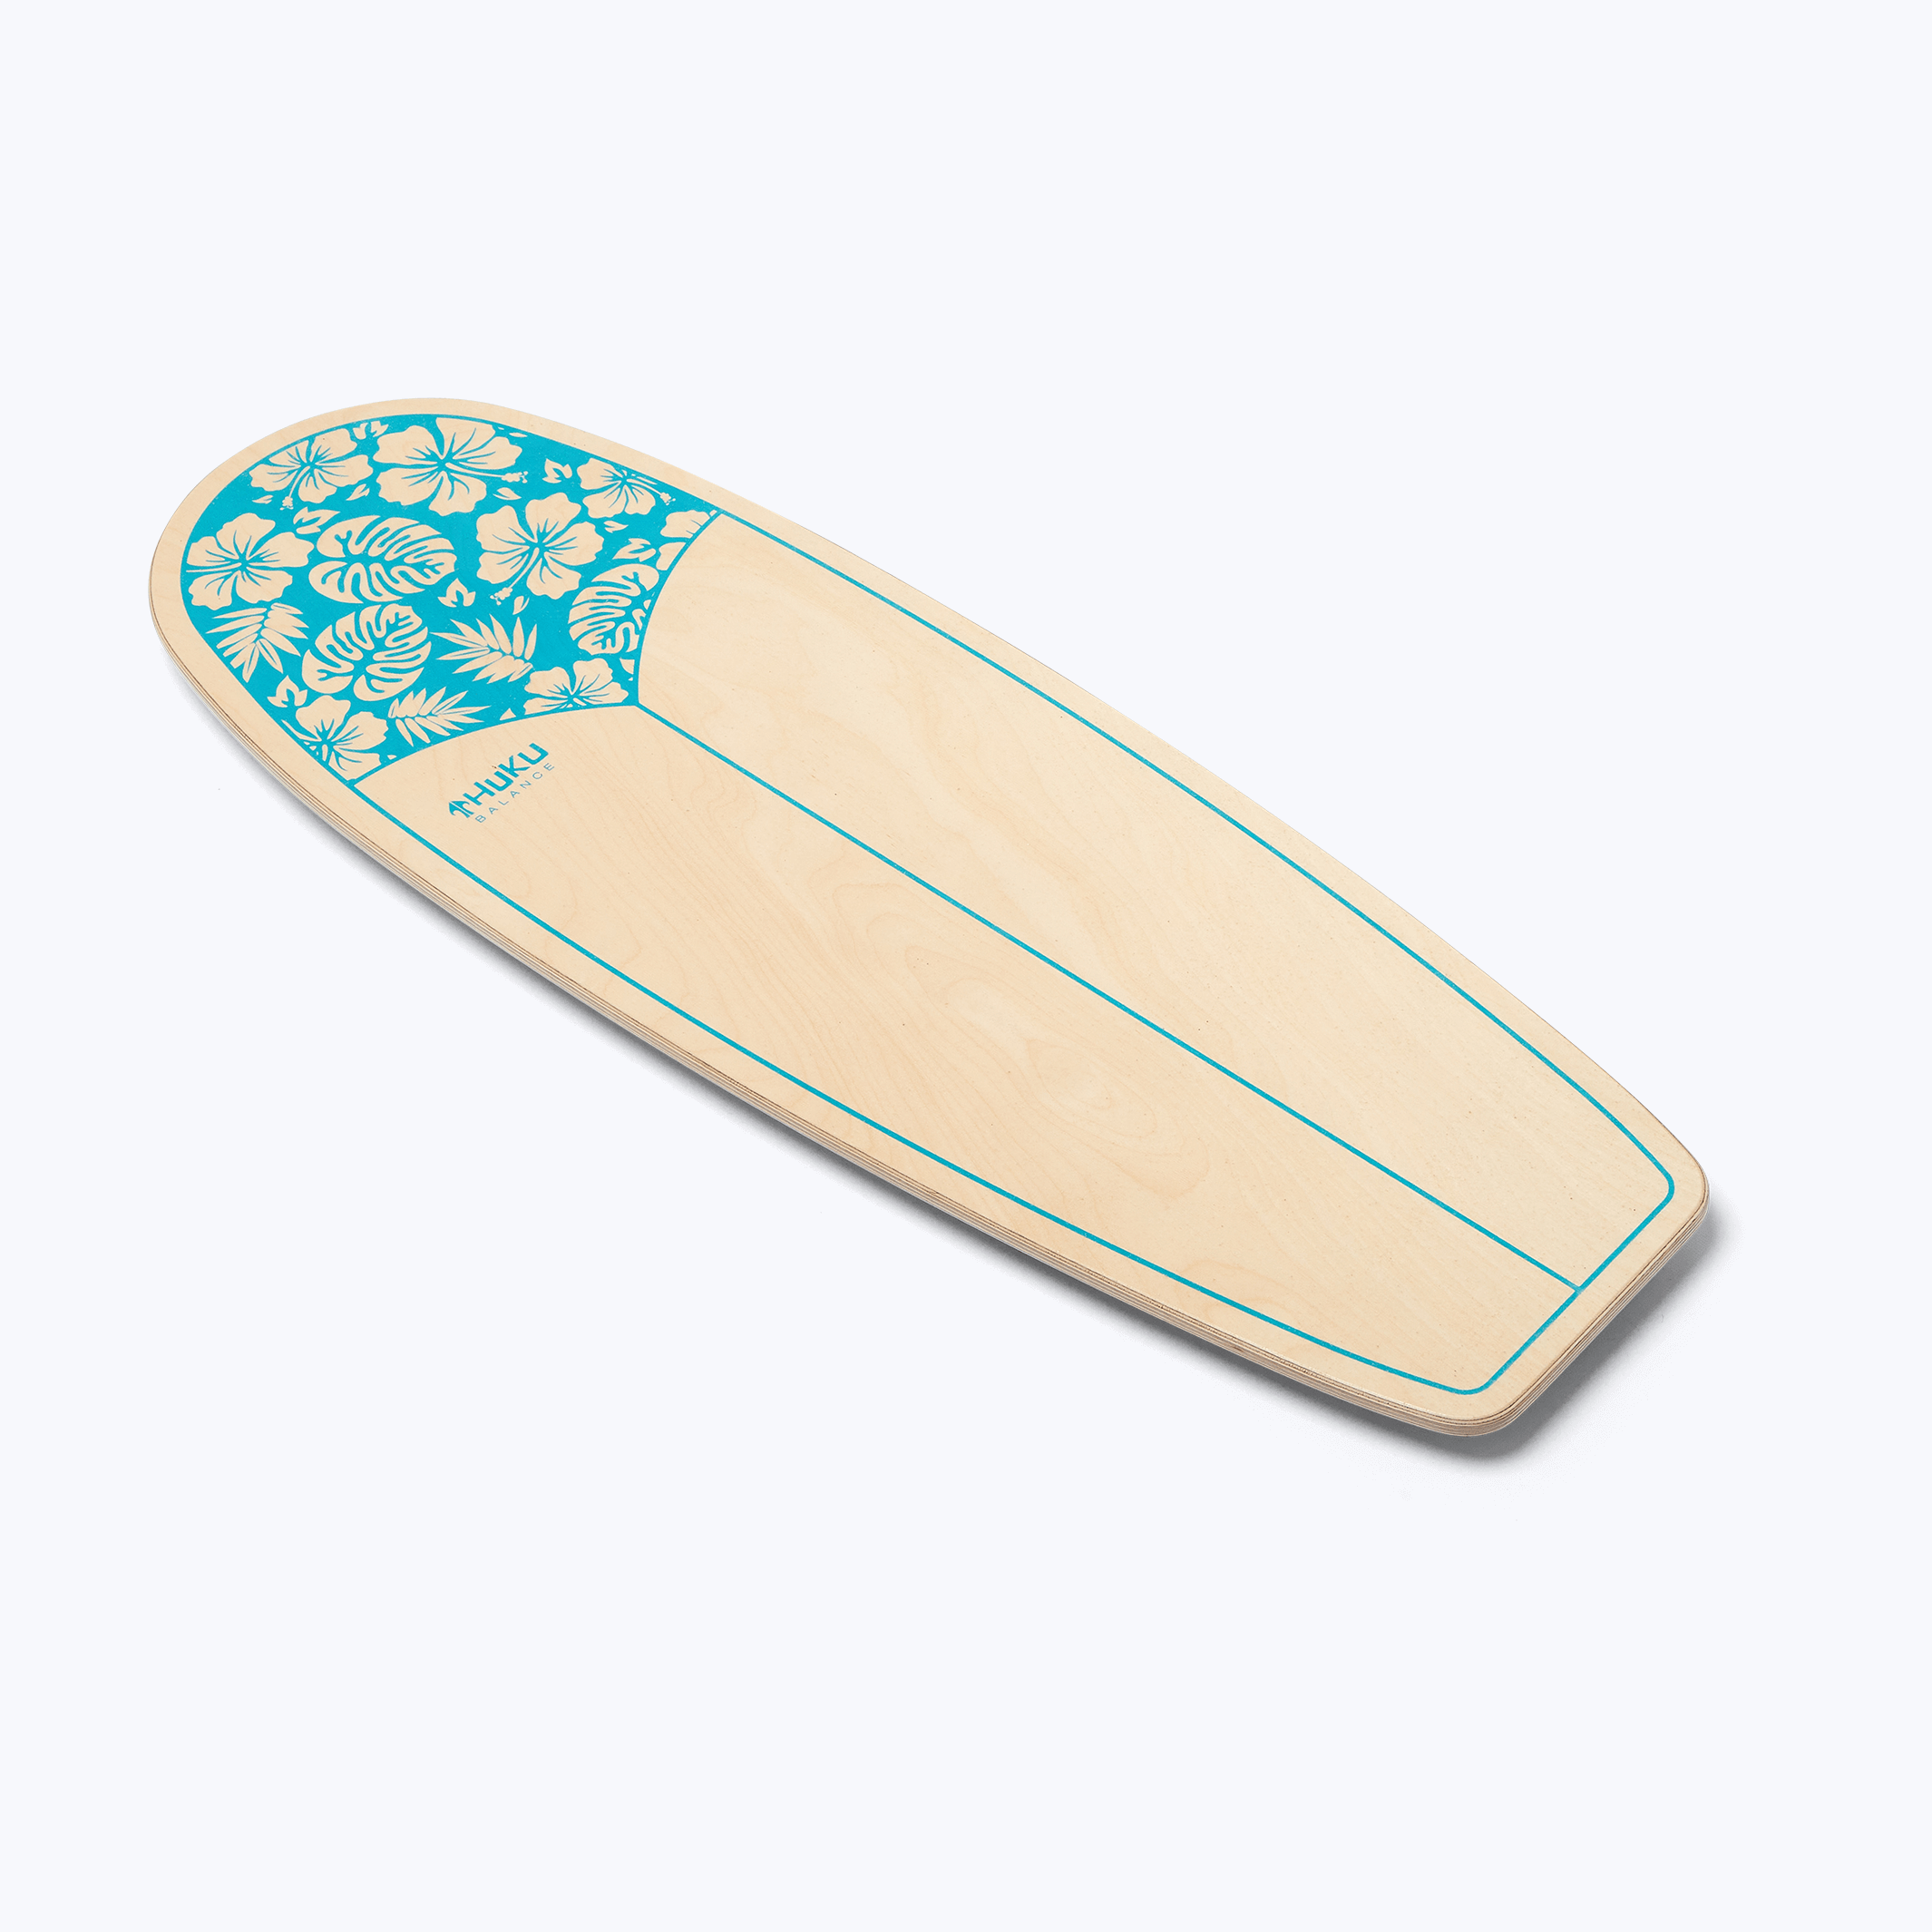 Huku Nalu Deck - Perfect for surfers, snowboarders, wakeboarders, and all board riders.  